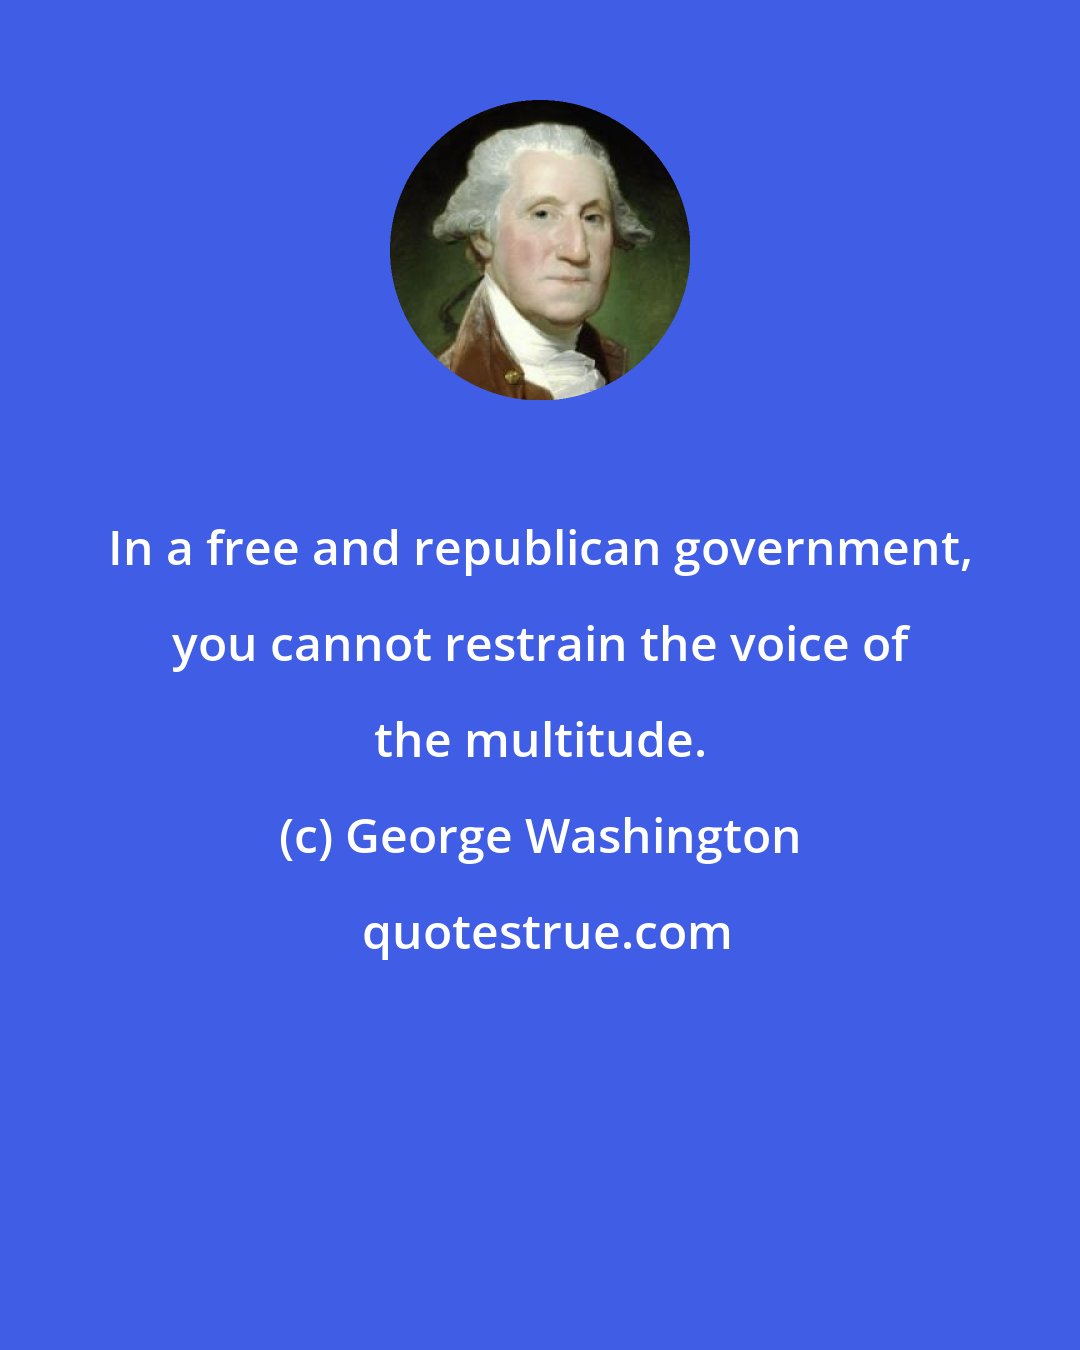 George Washington: In a free and republican government, you cannot restrain the voice of the multitude.